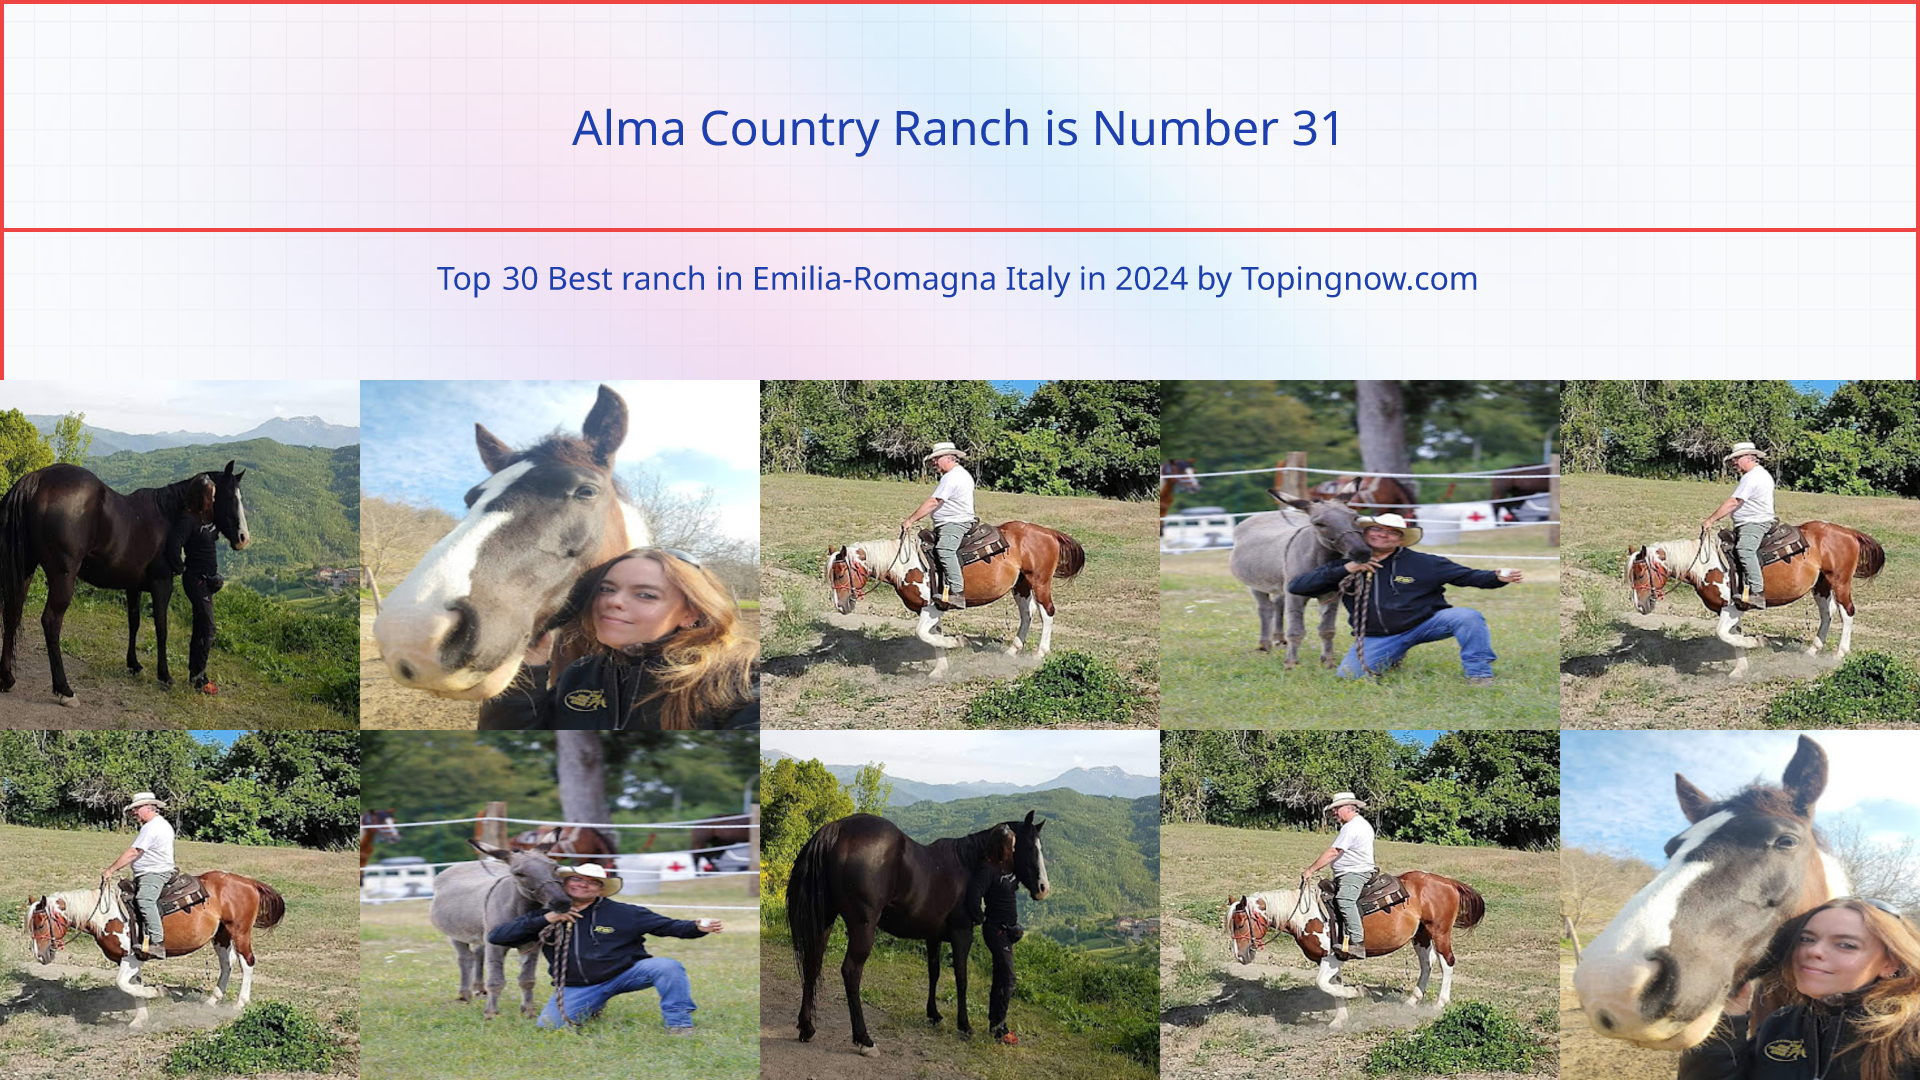 Alma Country Ranch: Top 30 Best ranch in Emilia-Romagna Italy in 2024